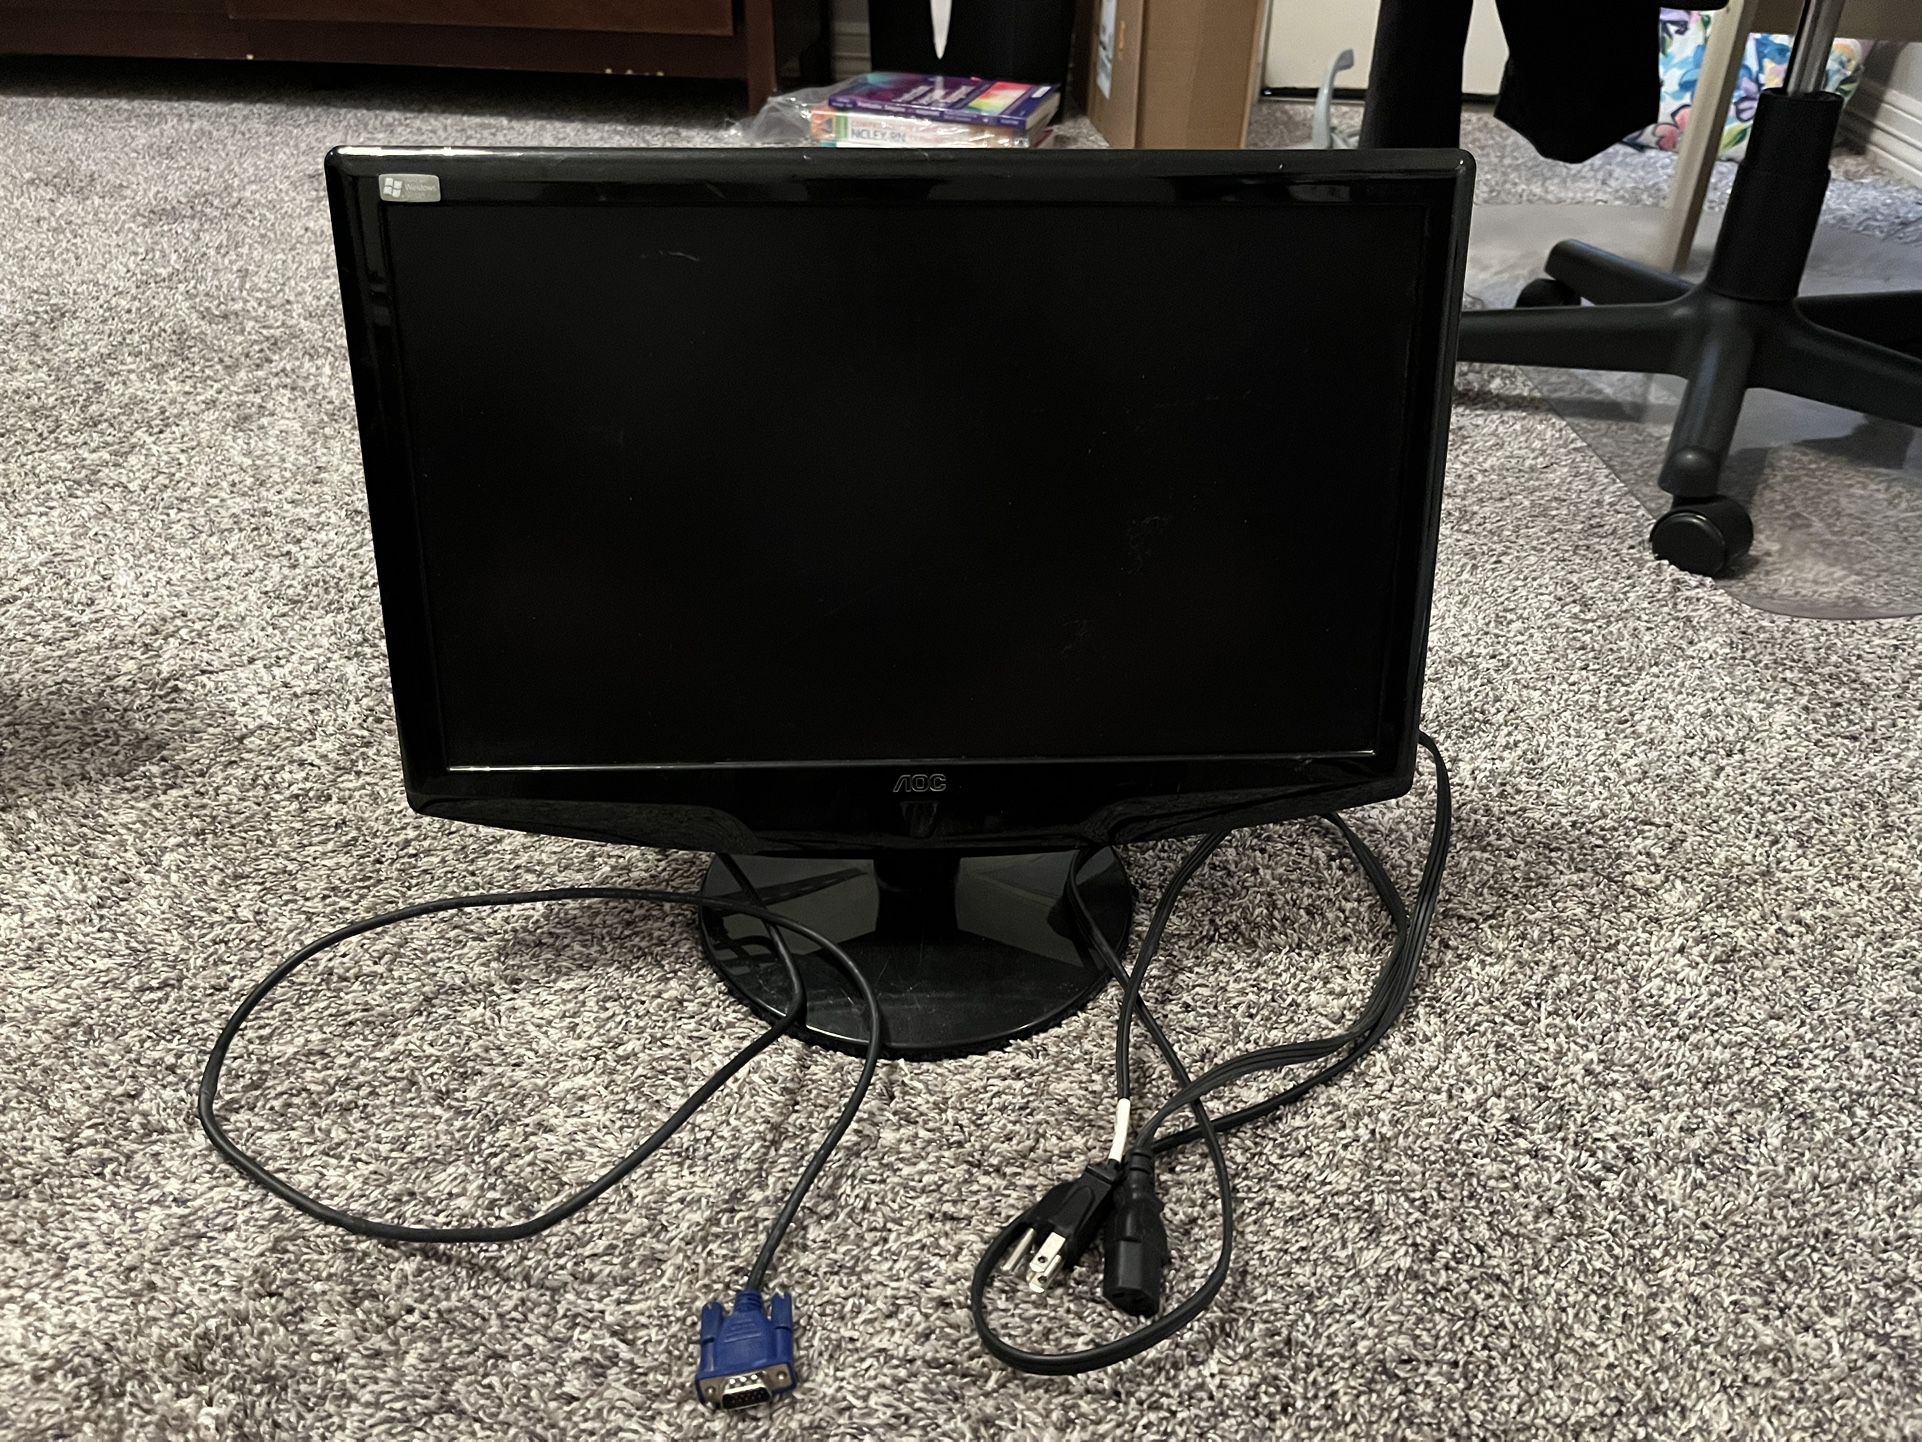 17” Monitor With VGA Cable